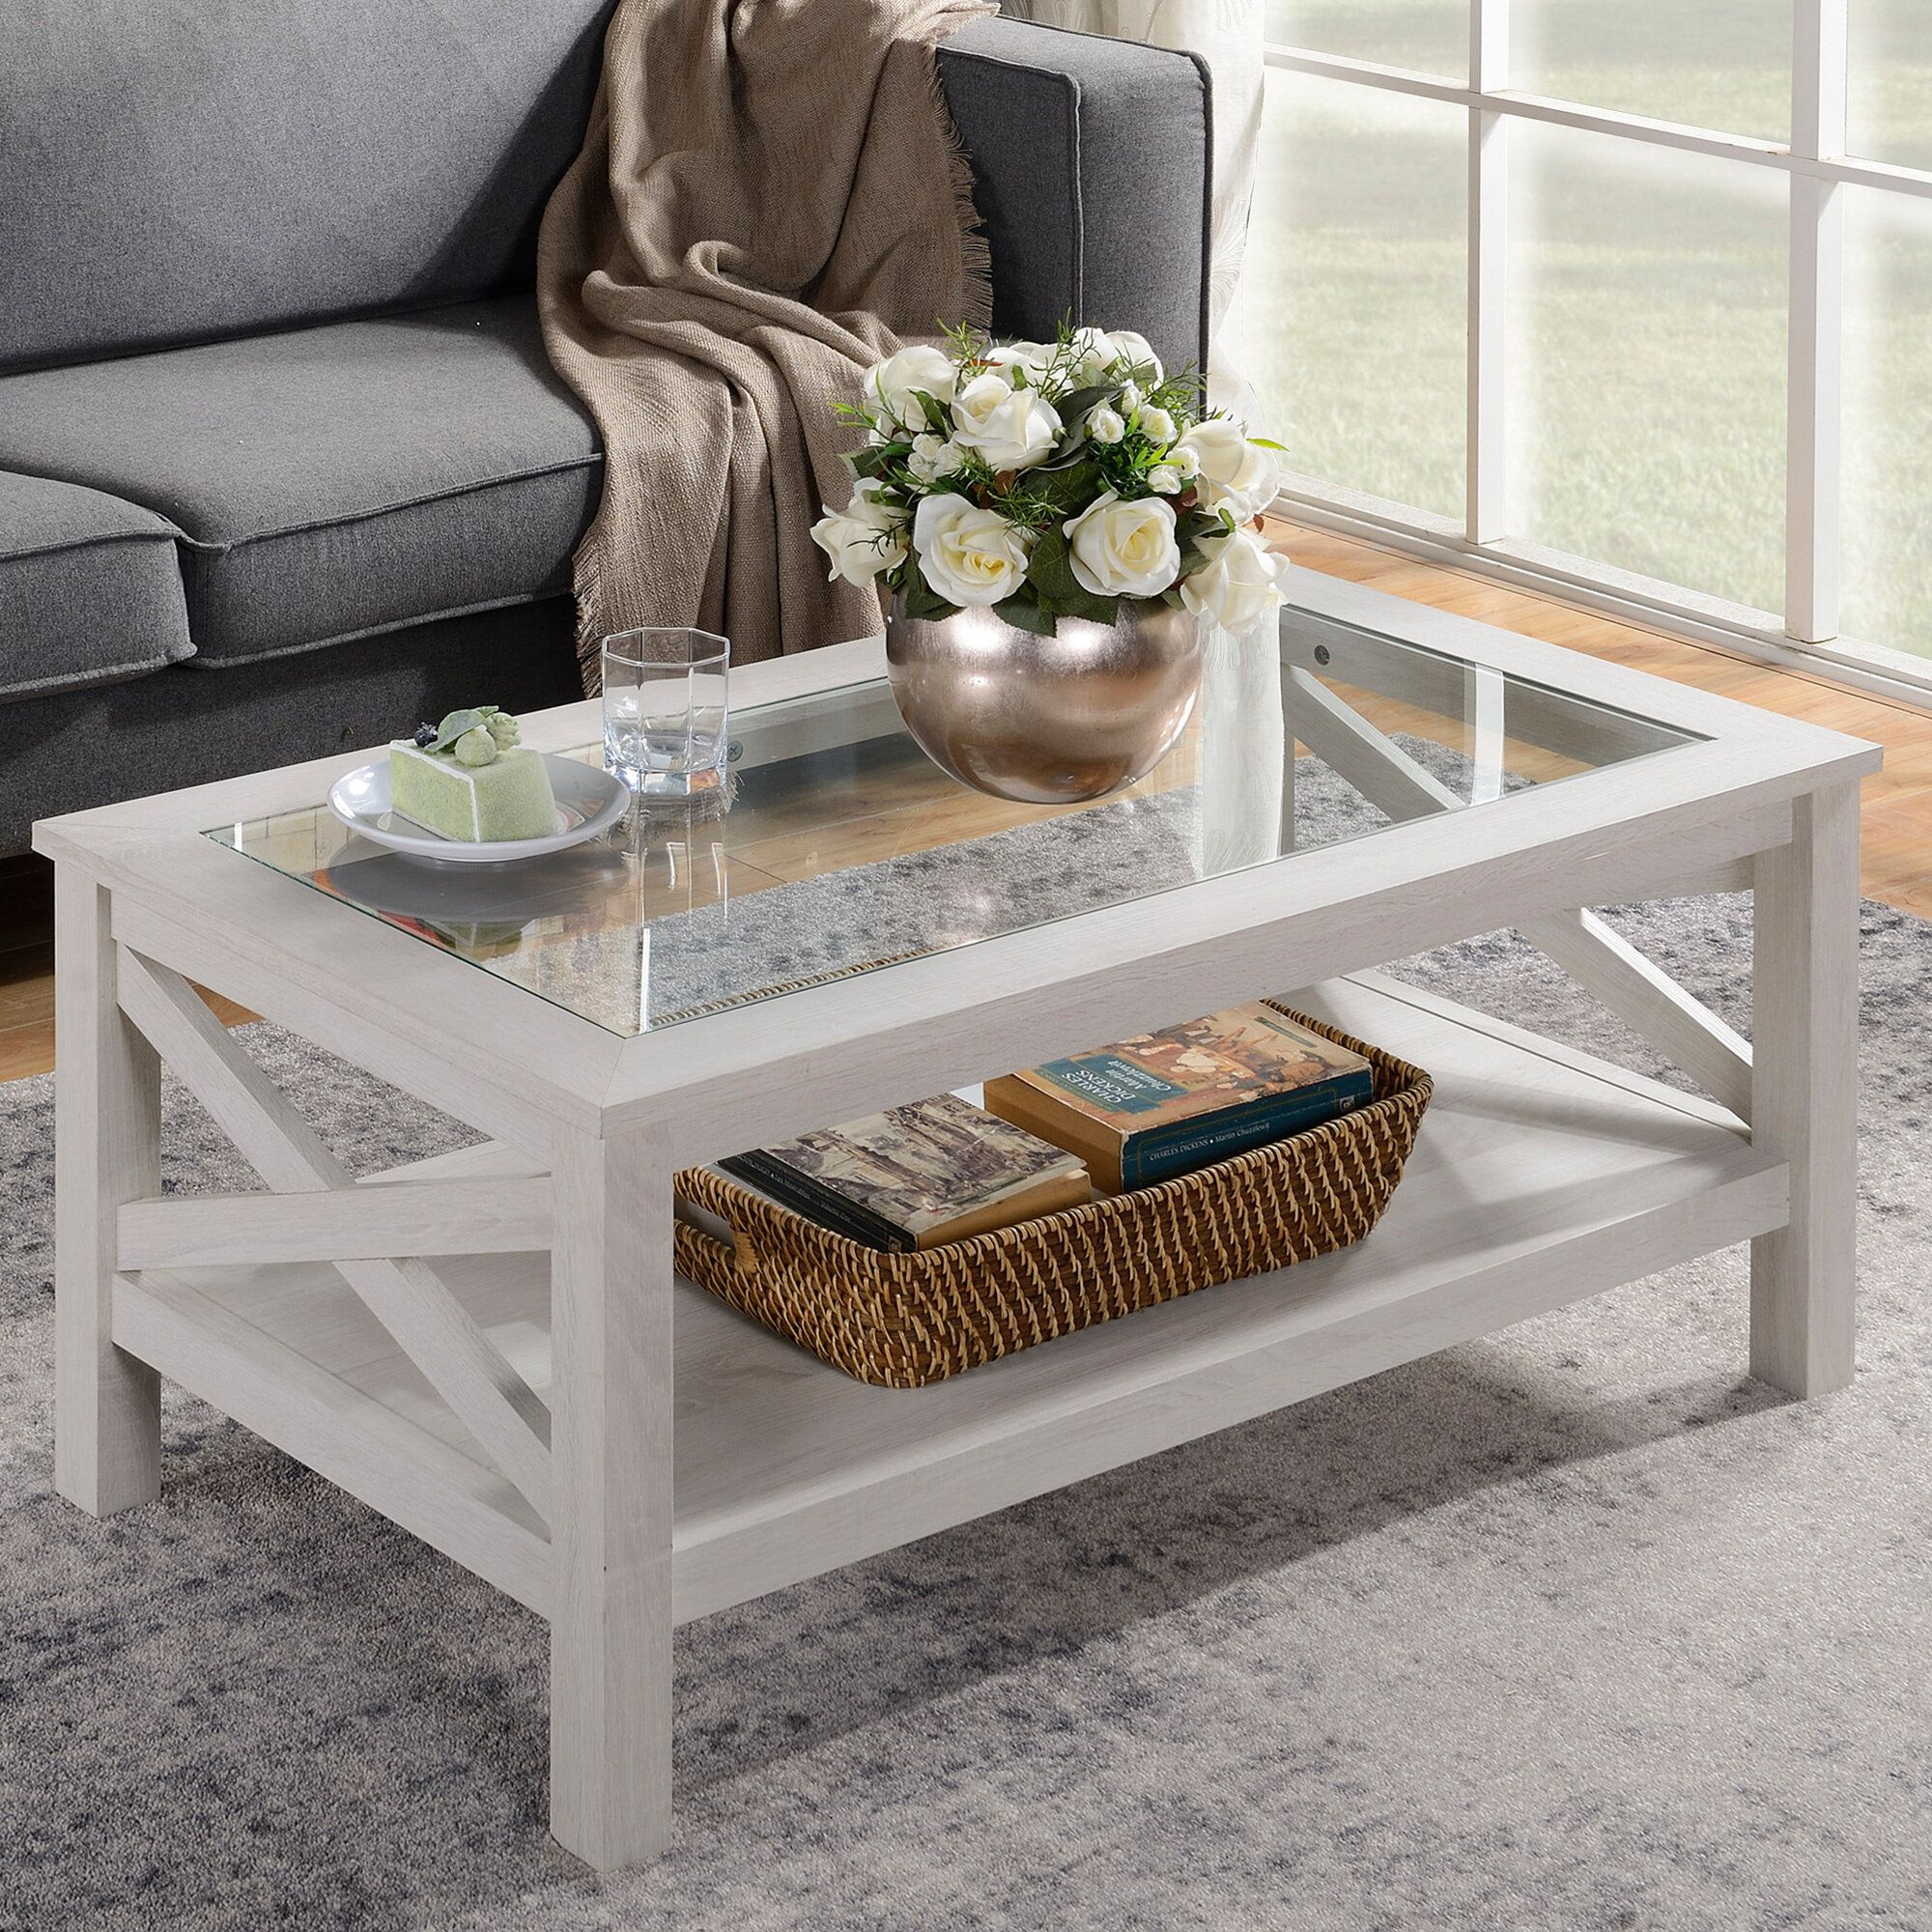 Gracie Oaks Espinet Traditional Coffee Table With Wood Frame, Tempered Glass  Tabletop And Underneath Storage Shelf, White Oak & Reviews | Wayfair Intended For Glass Tabletop Coffee Tables (View 1 of 15)